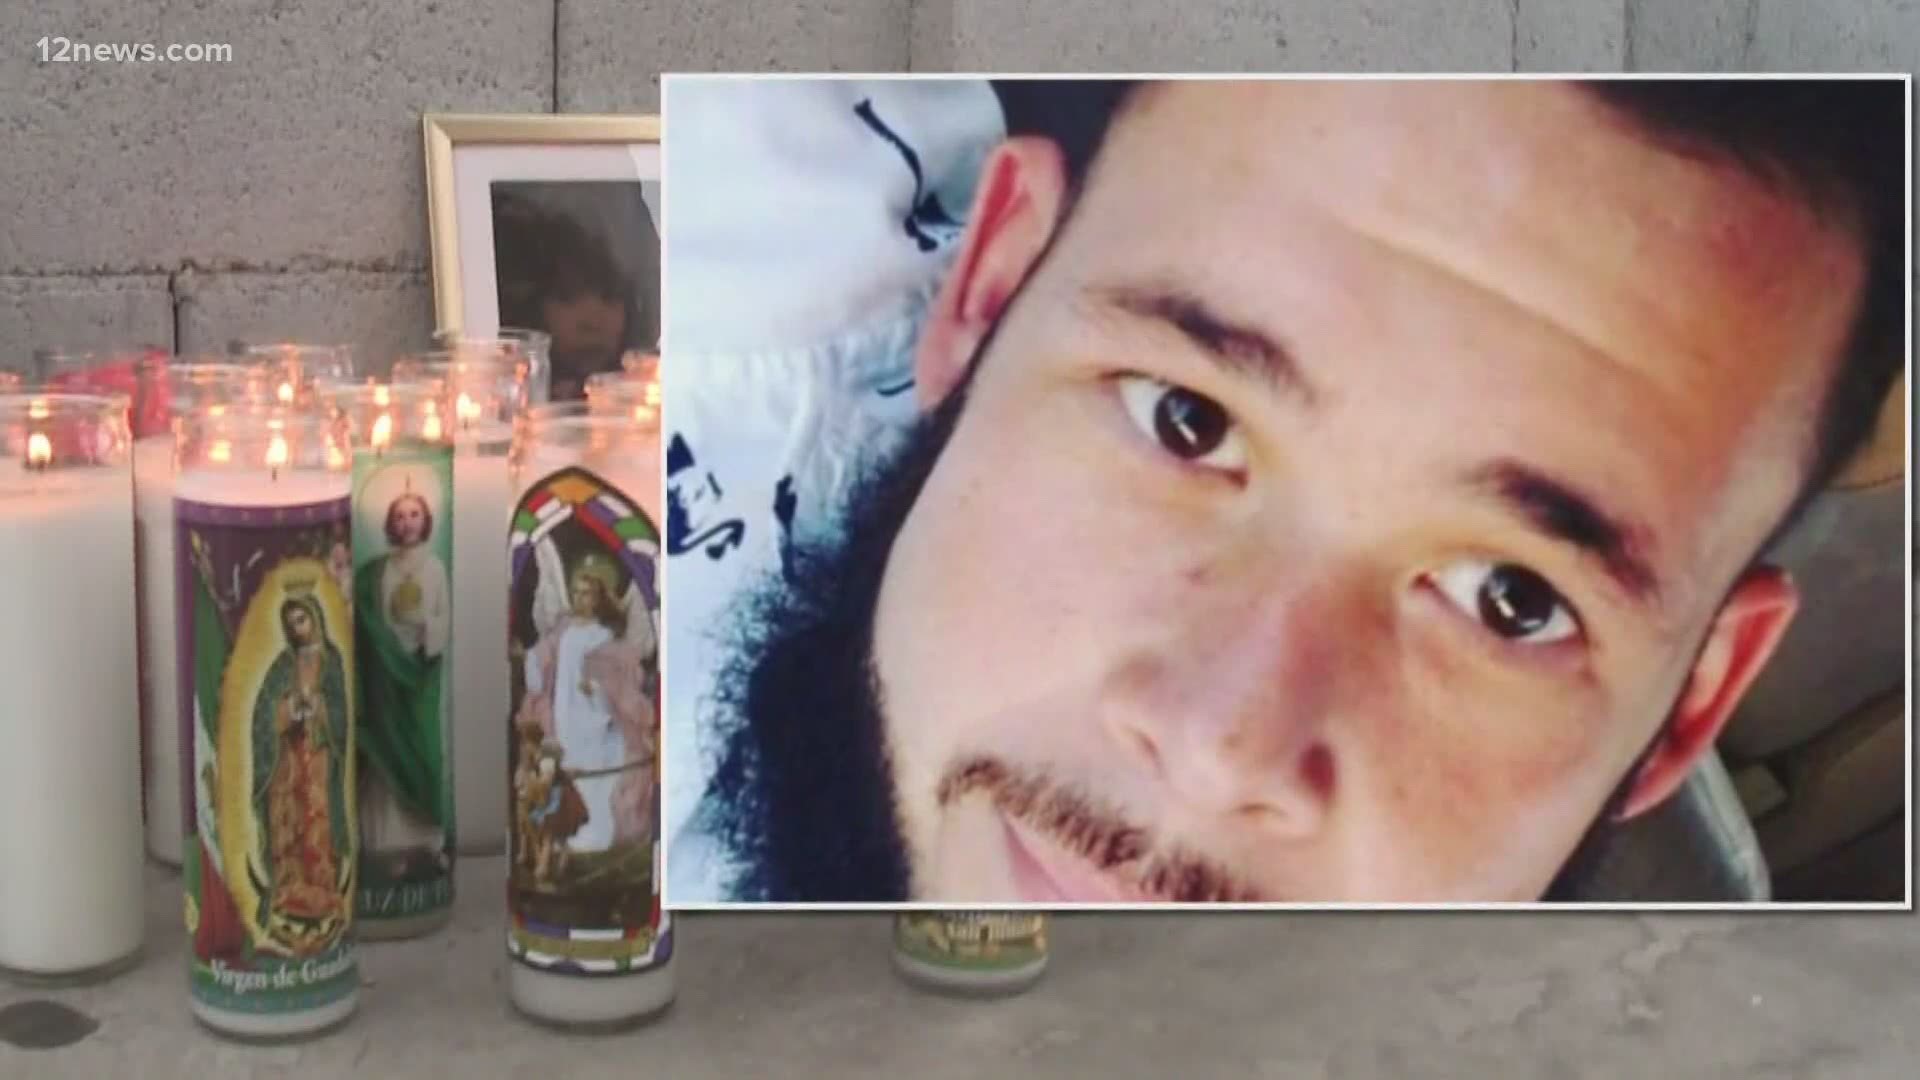 The family of James Garcia, killed in an officer-involved shooting in Phoenix on July 4th, called for police to release body camera video of the incident.